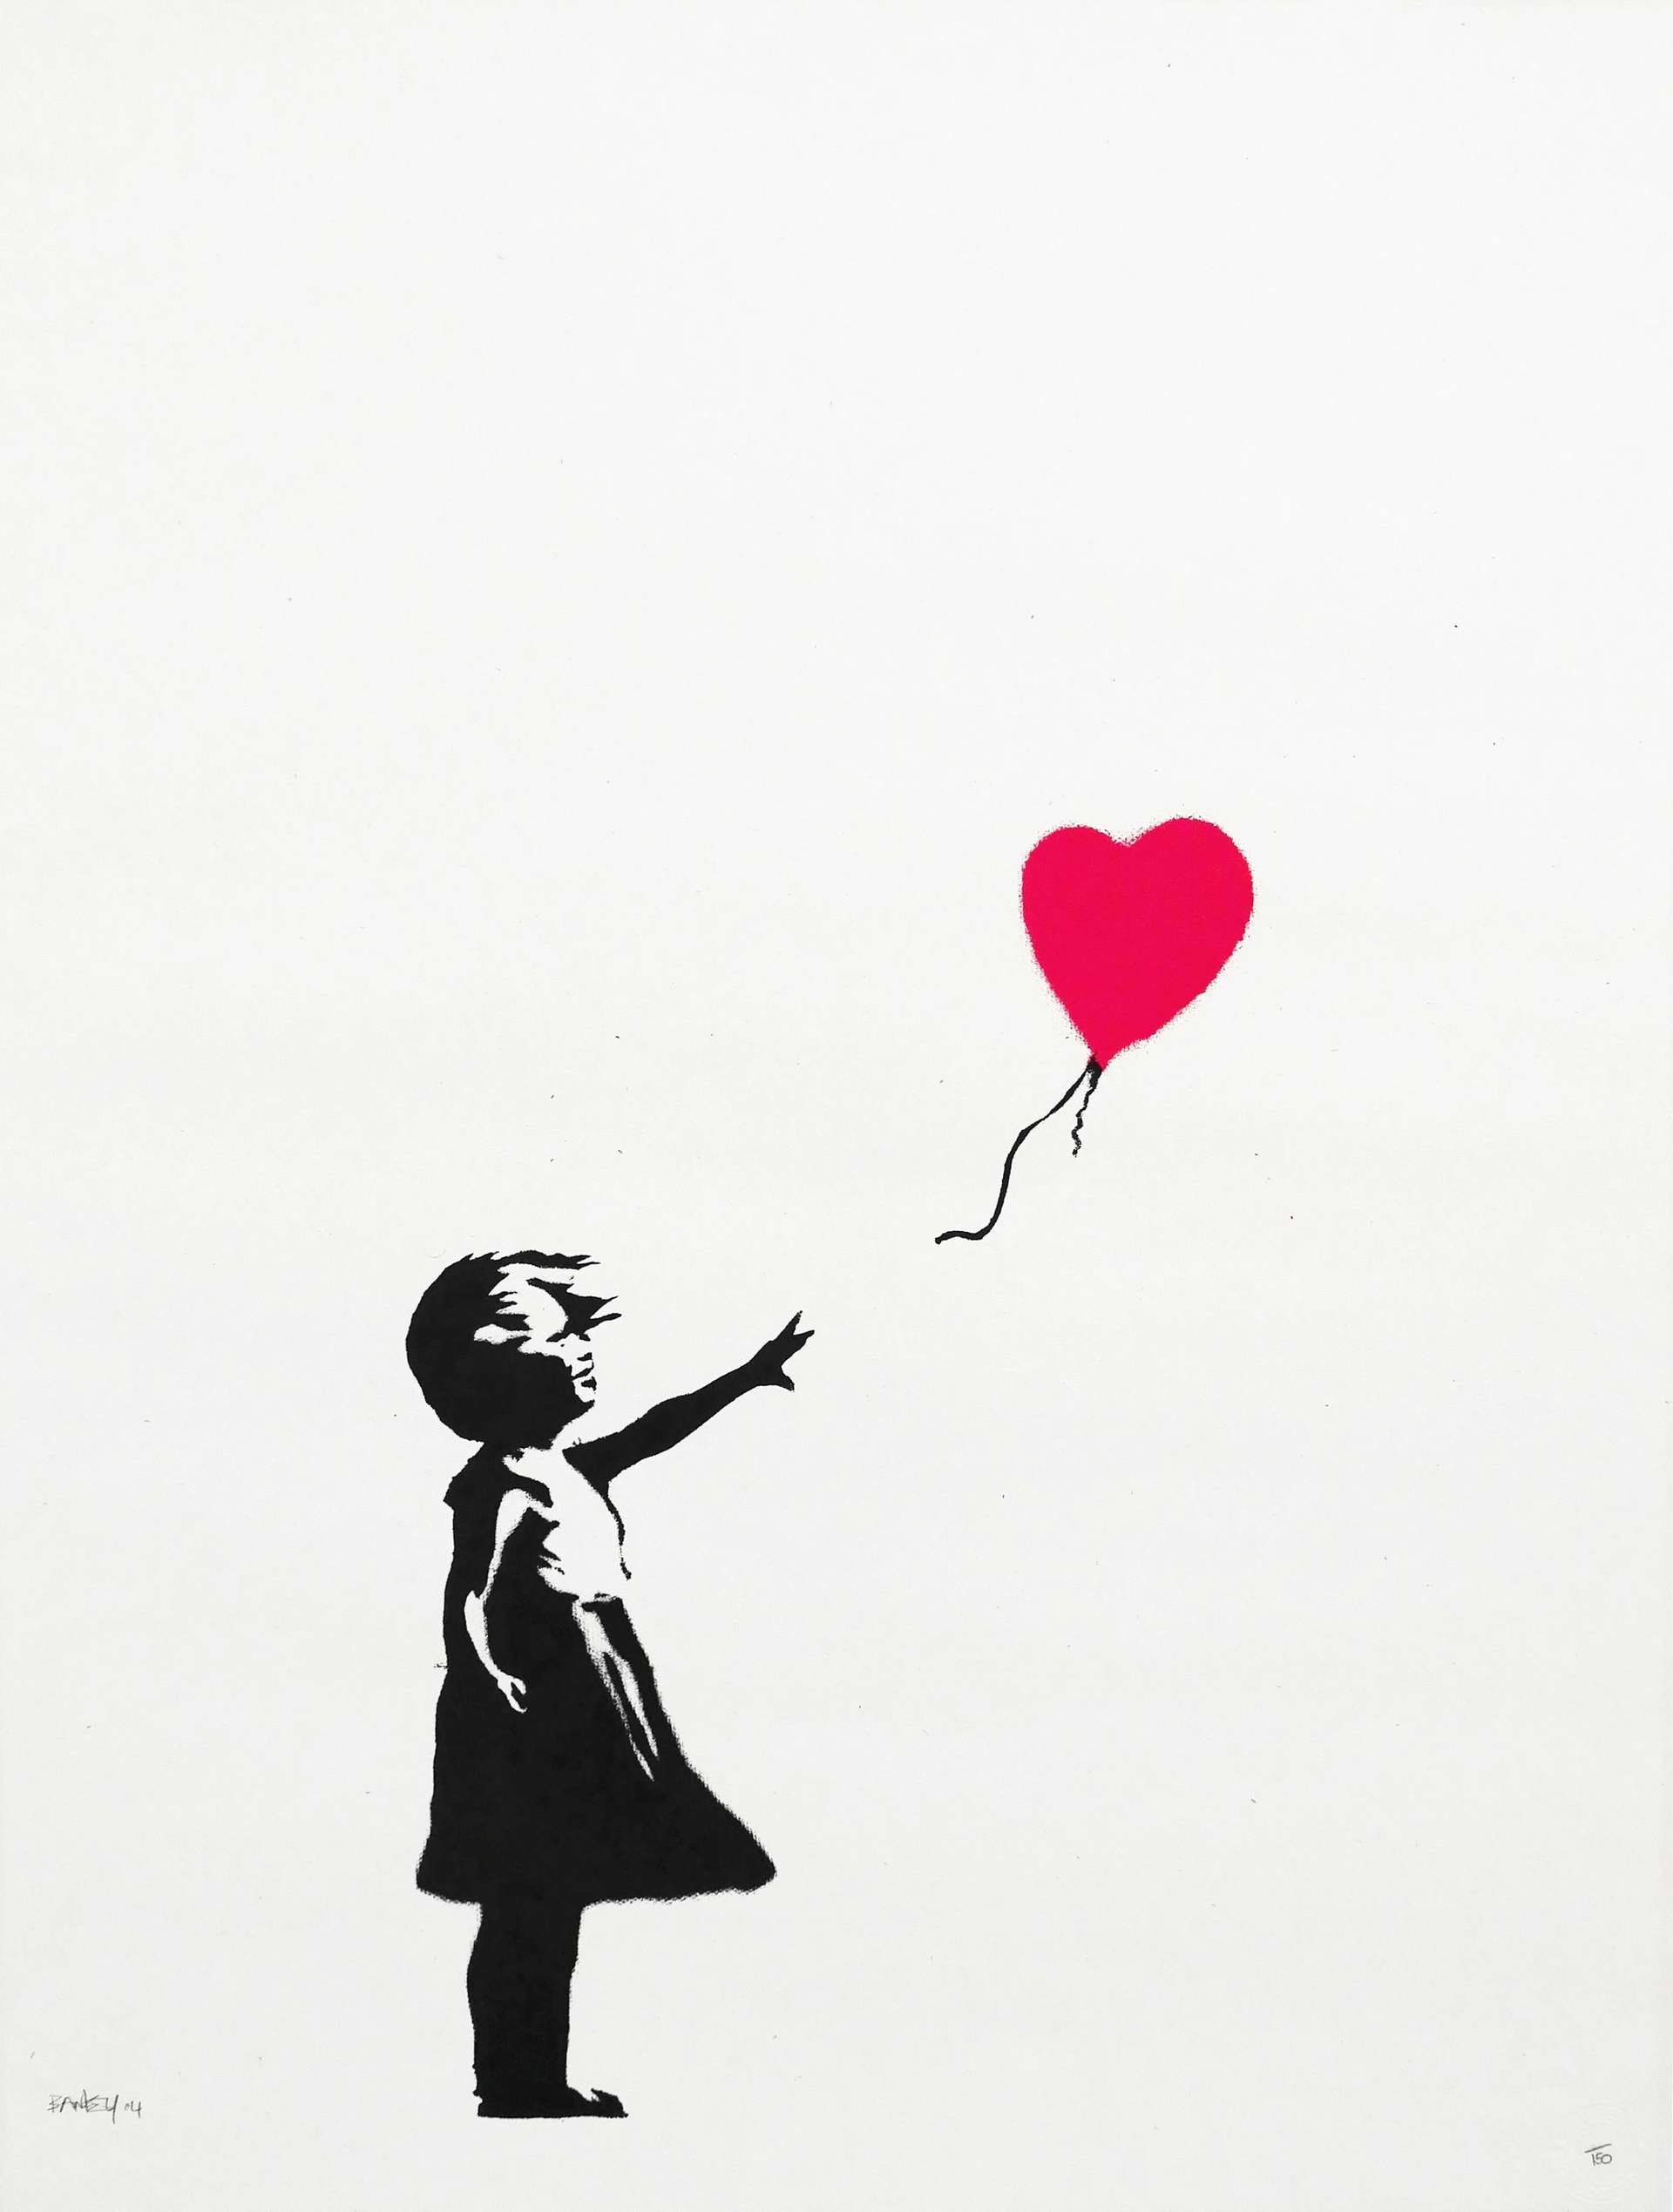 A young girl in a dress lets go of a red, heart-shaped balloon, graffitied on a white background.